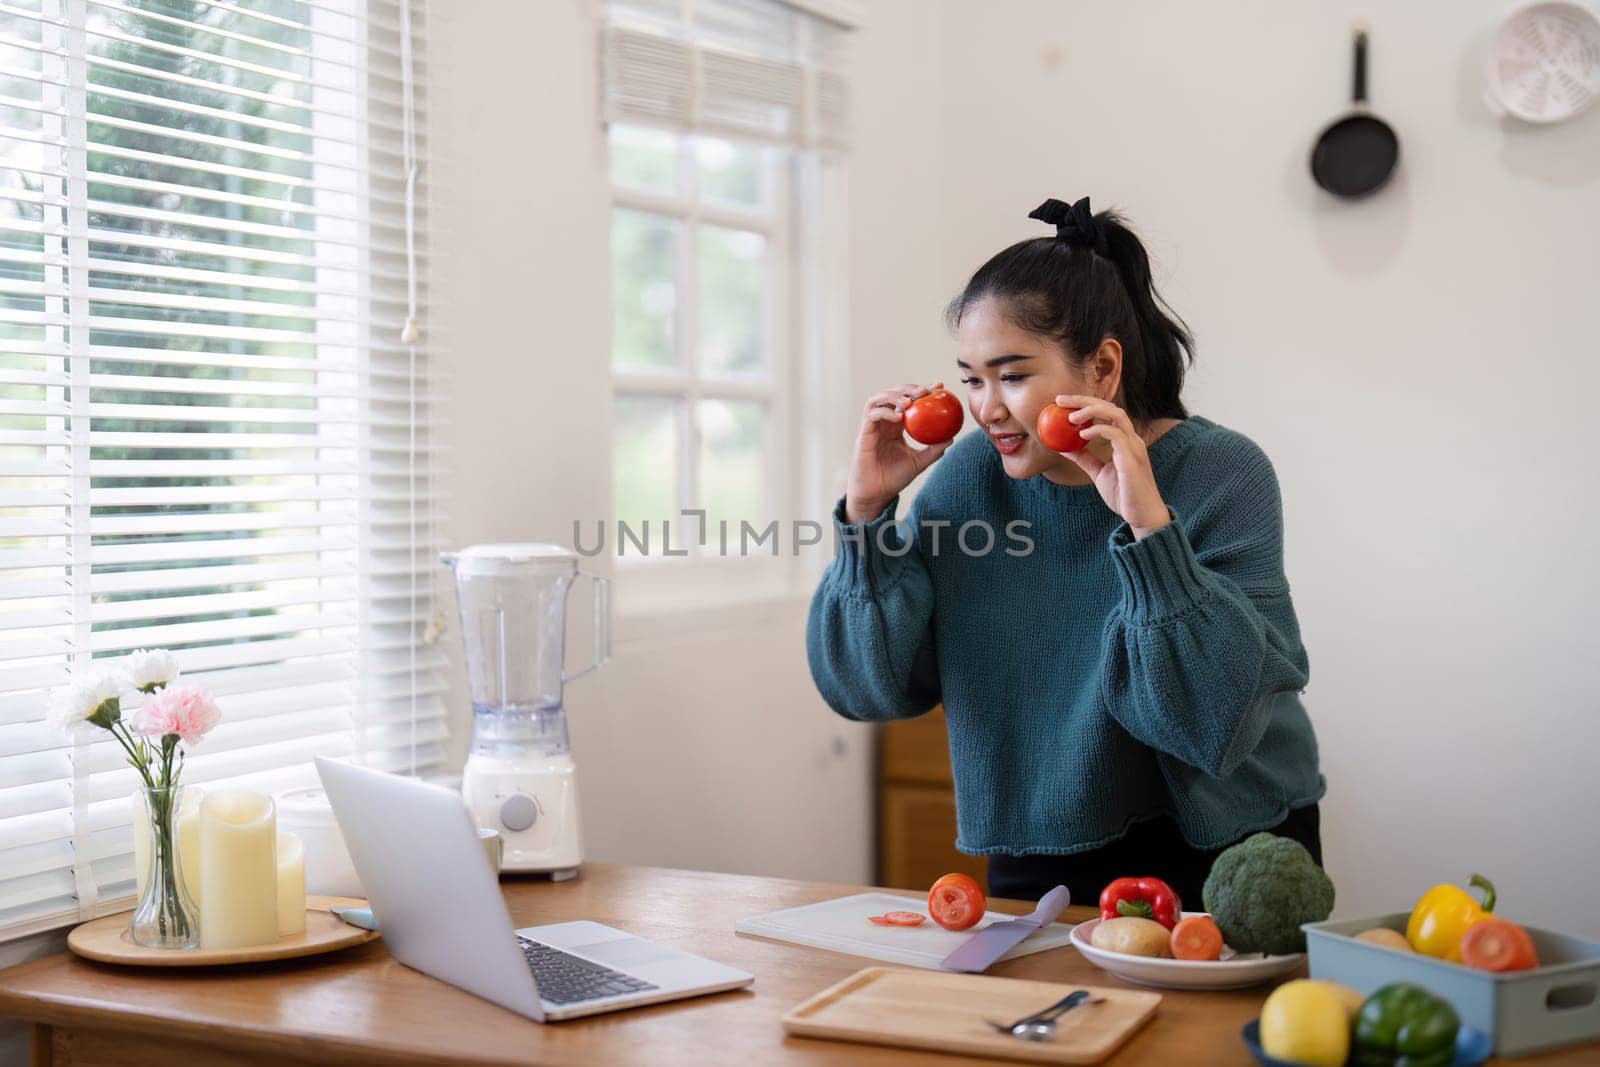 Young woman in a kitchen holding tomatoes, preparing vegetables on a cutting board, and video chatting via laptop, highlighting healthy cooking and online communication